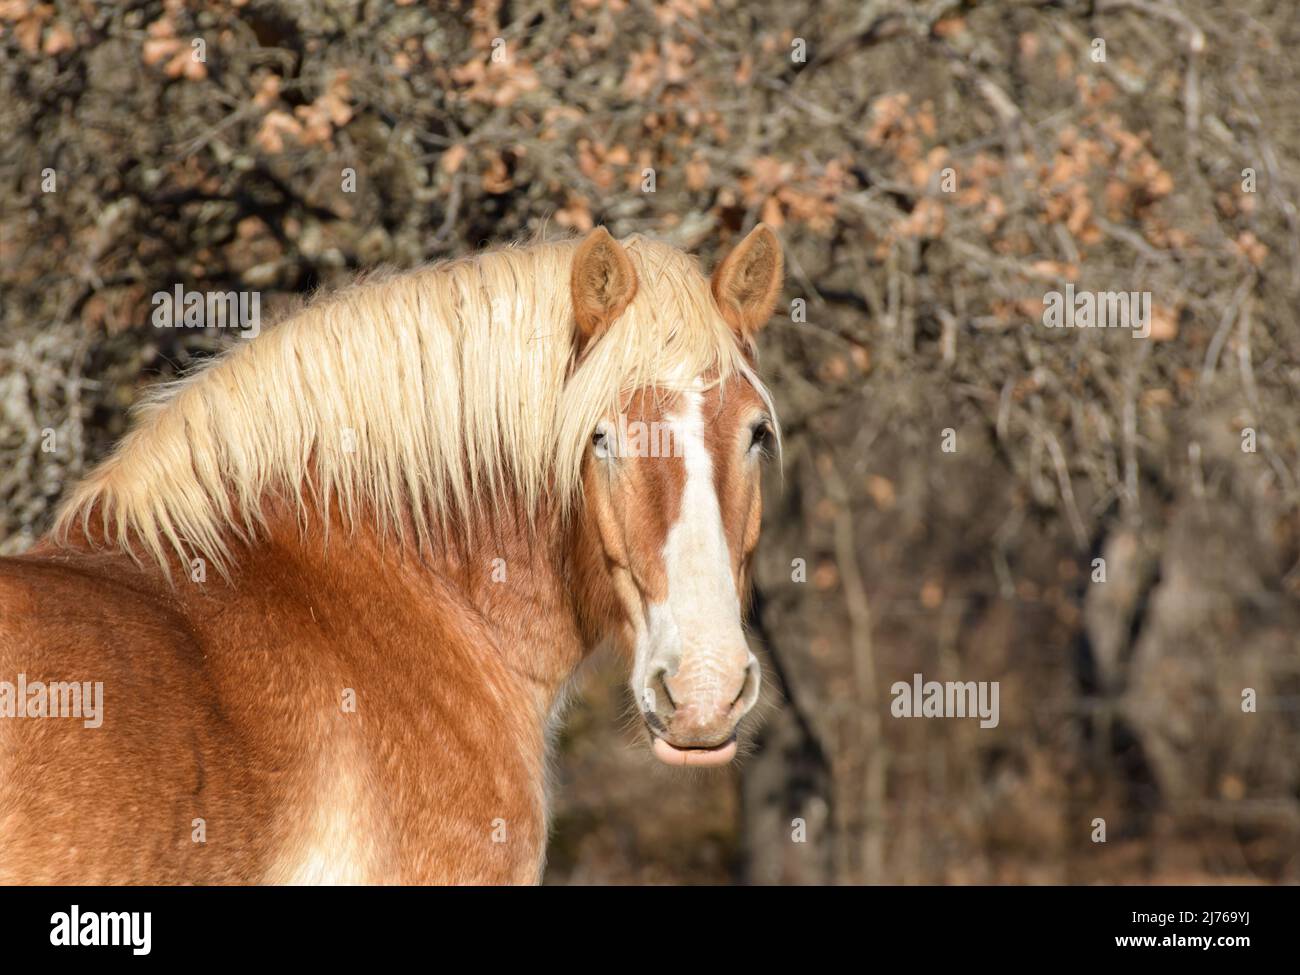 Handsome Belgian draft horse looking at the viewer, head-on; with muted autumn or winter background Stock Photo